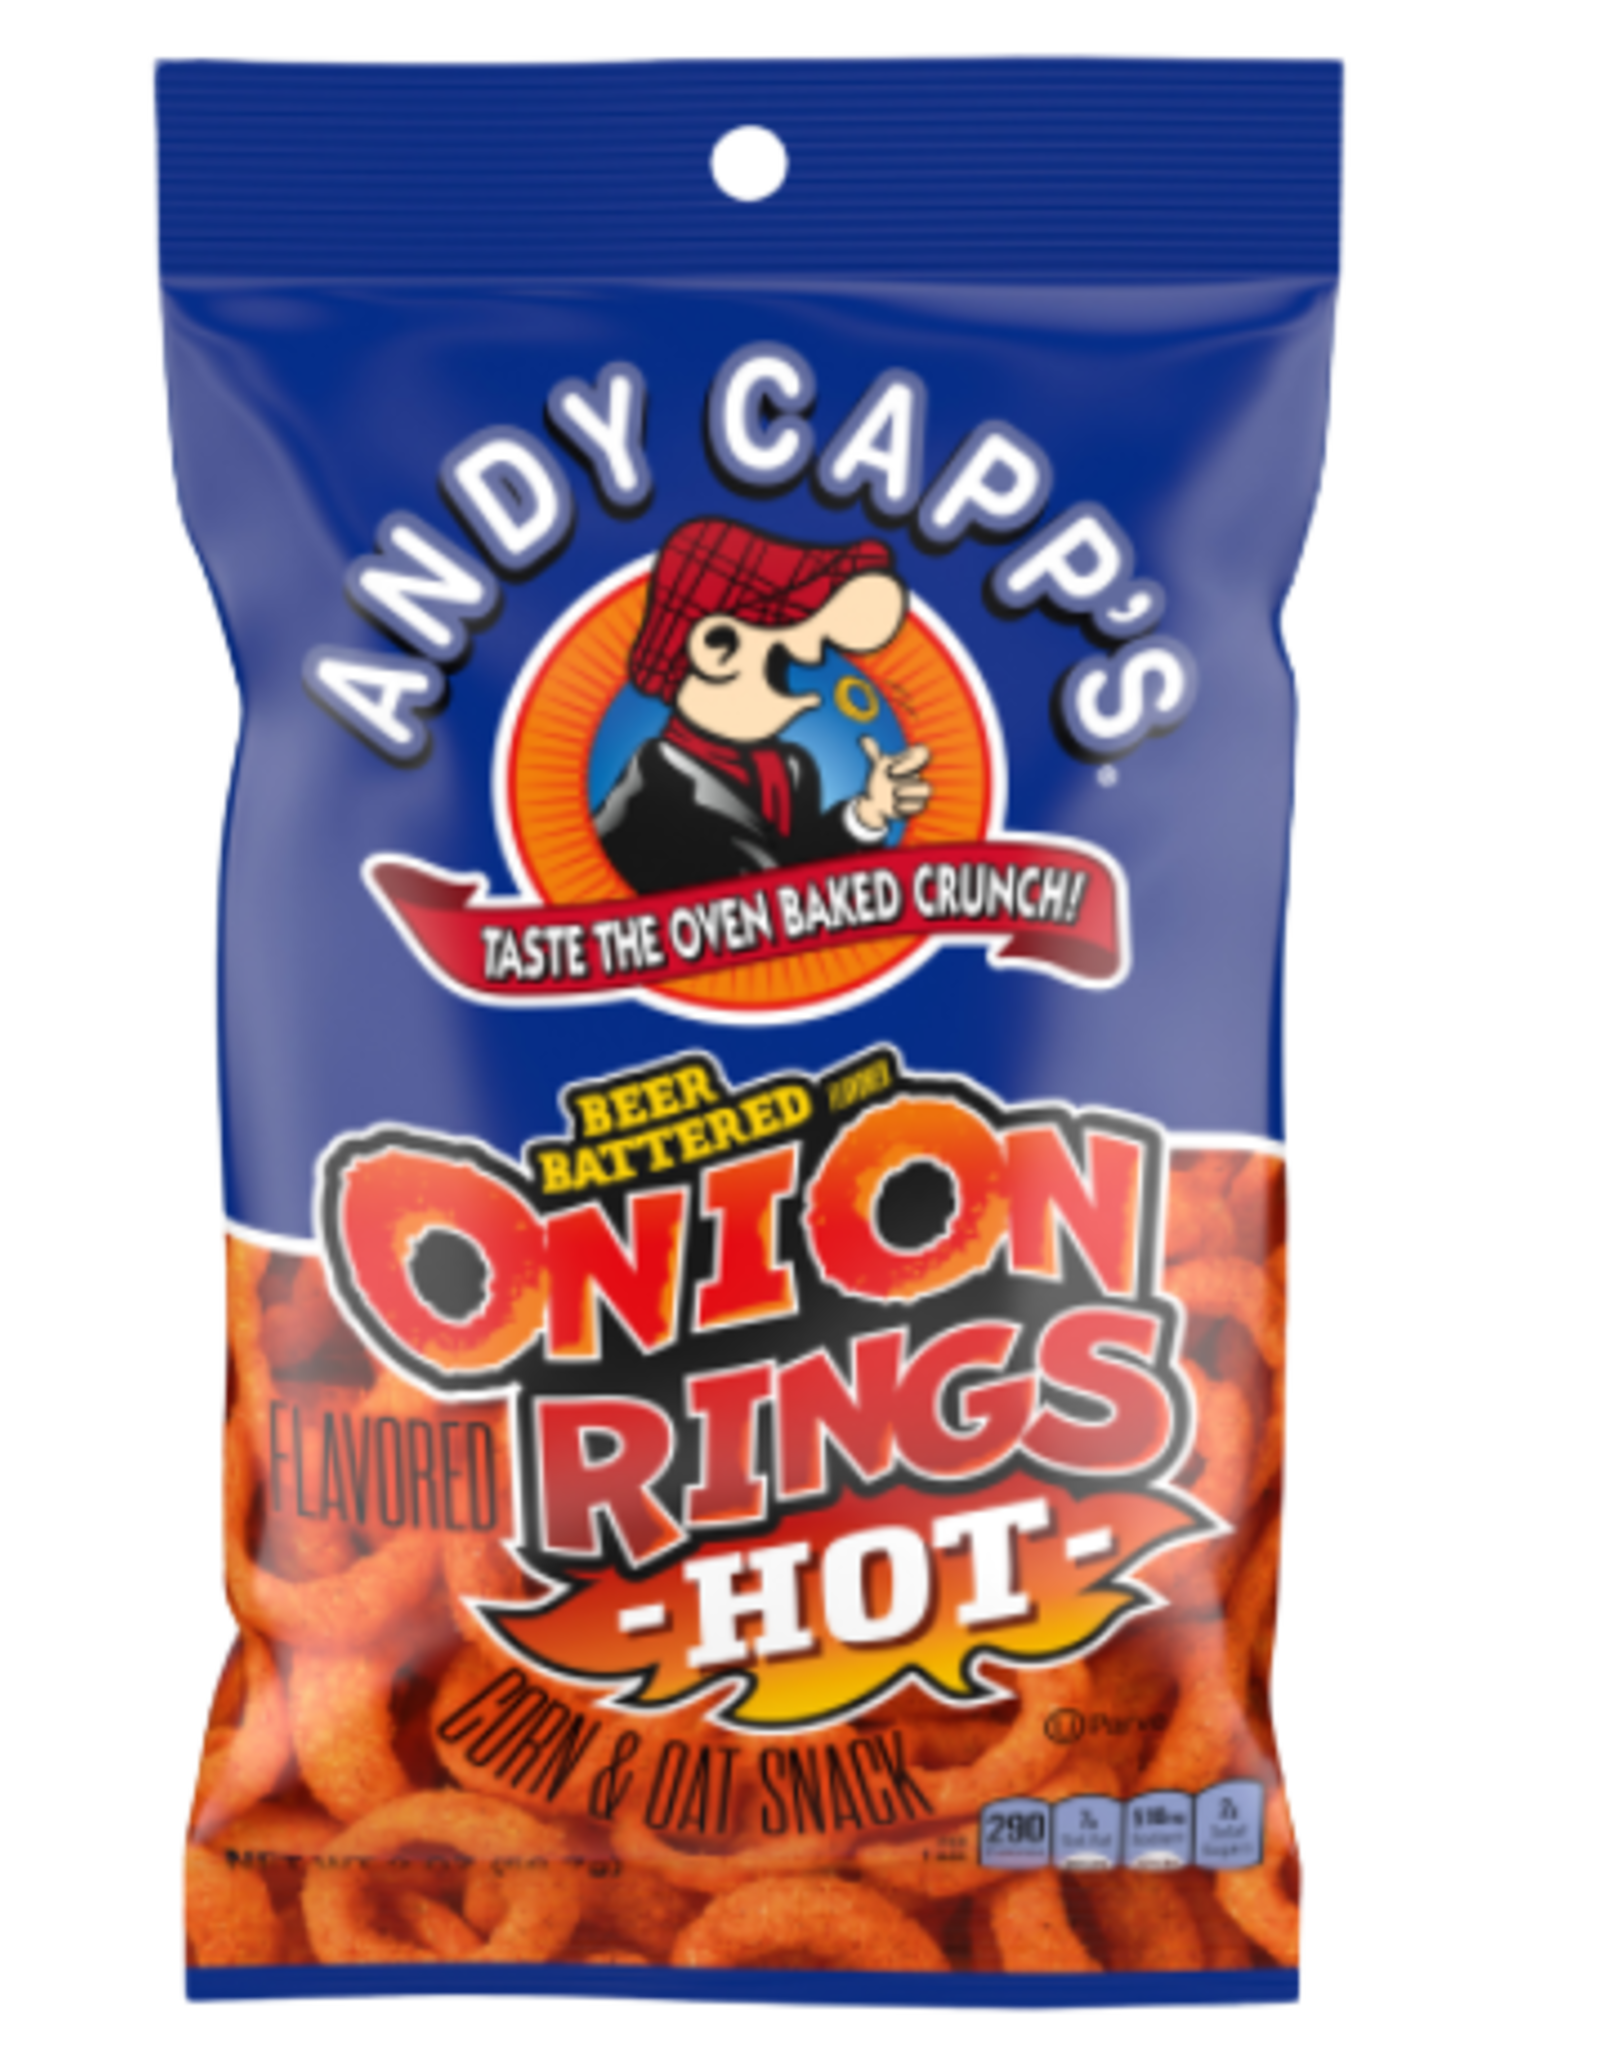 Andy Capp's Onion Rings Hot